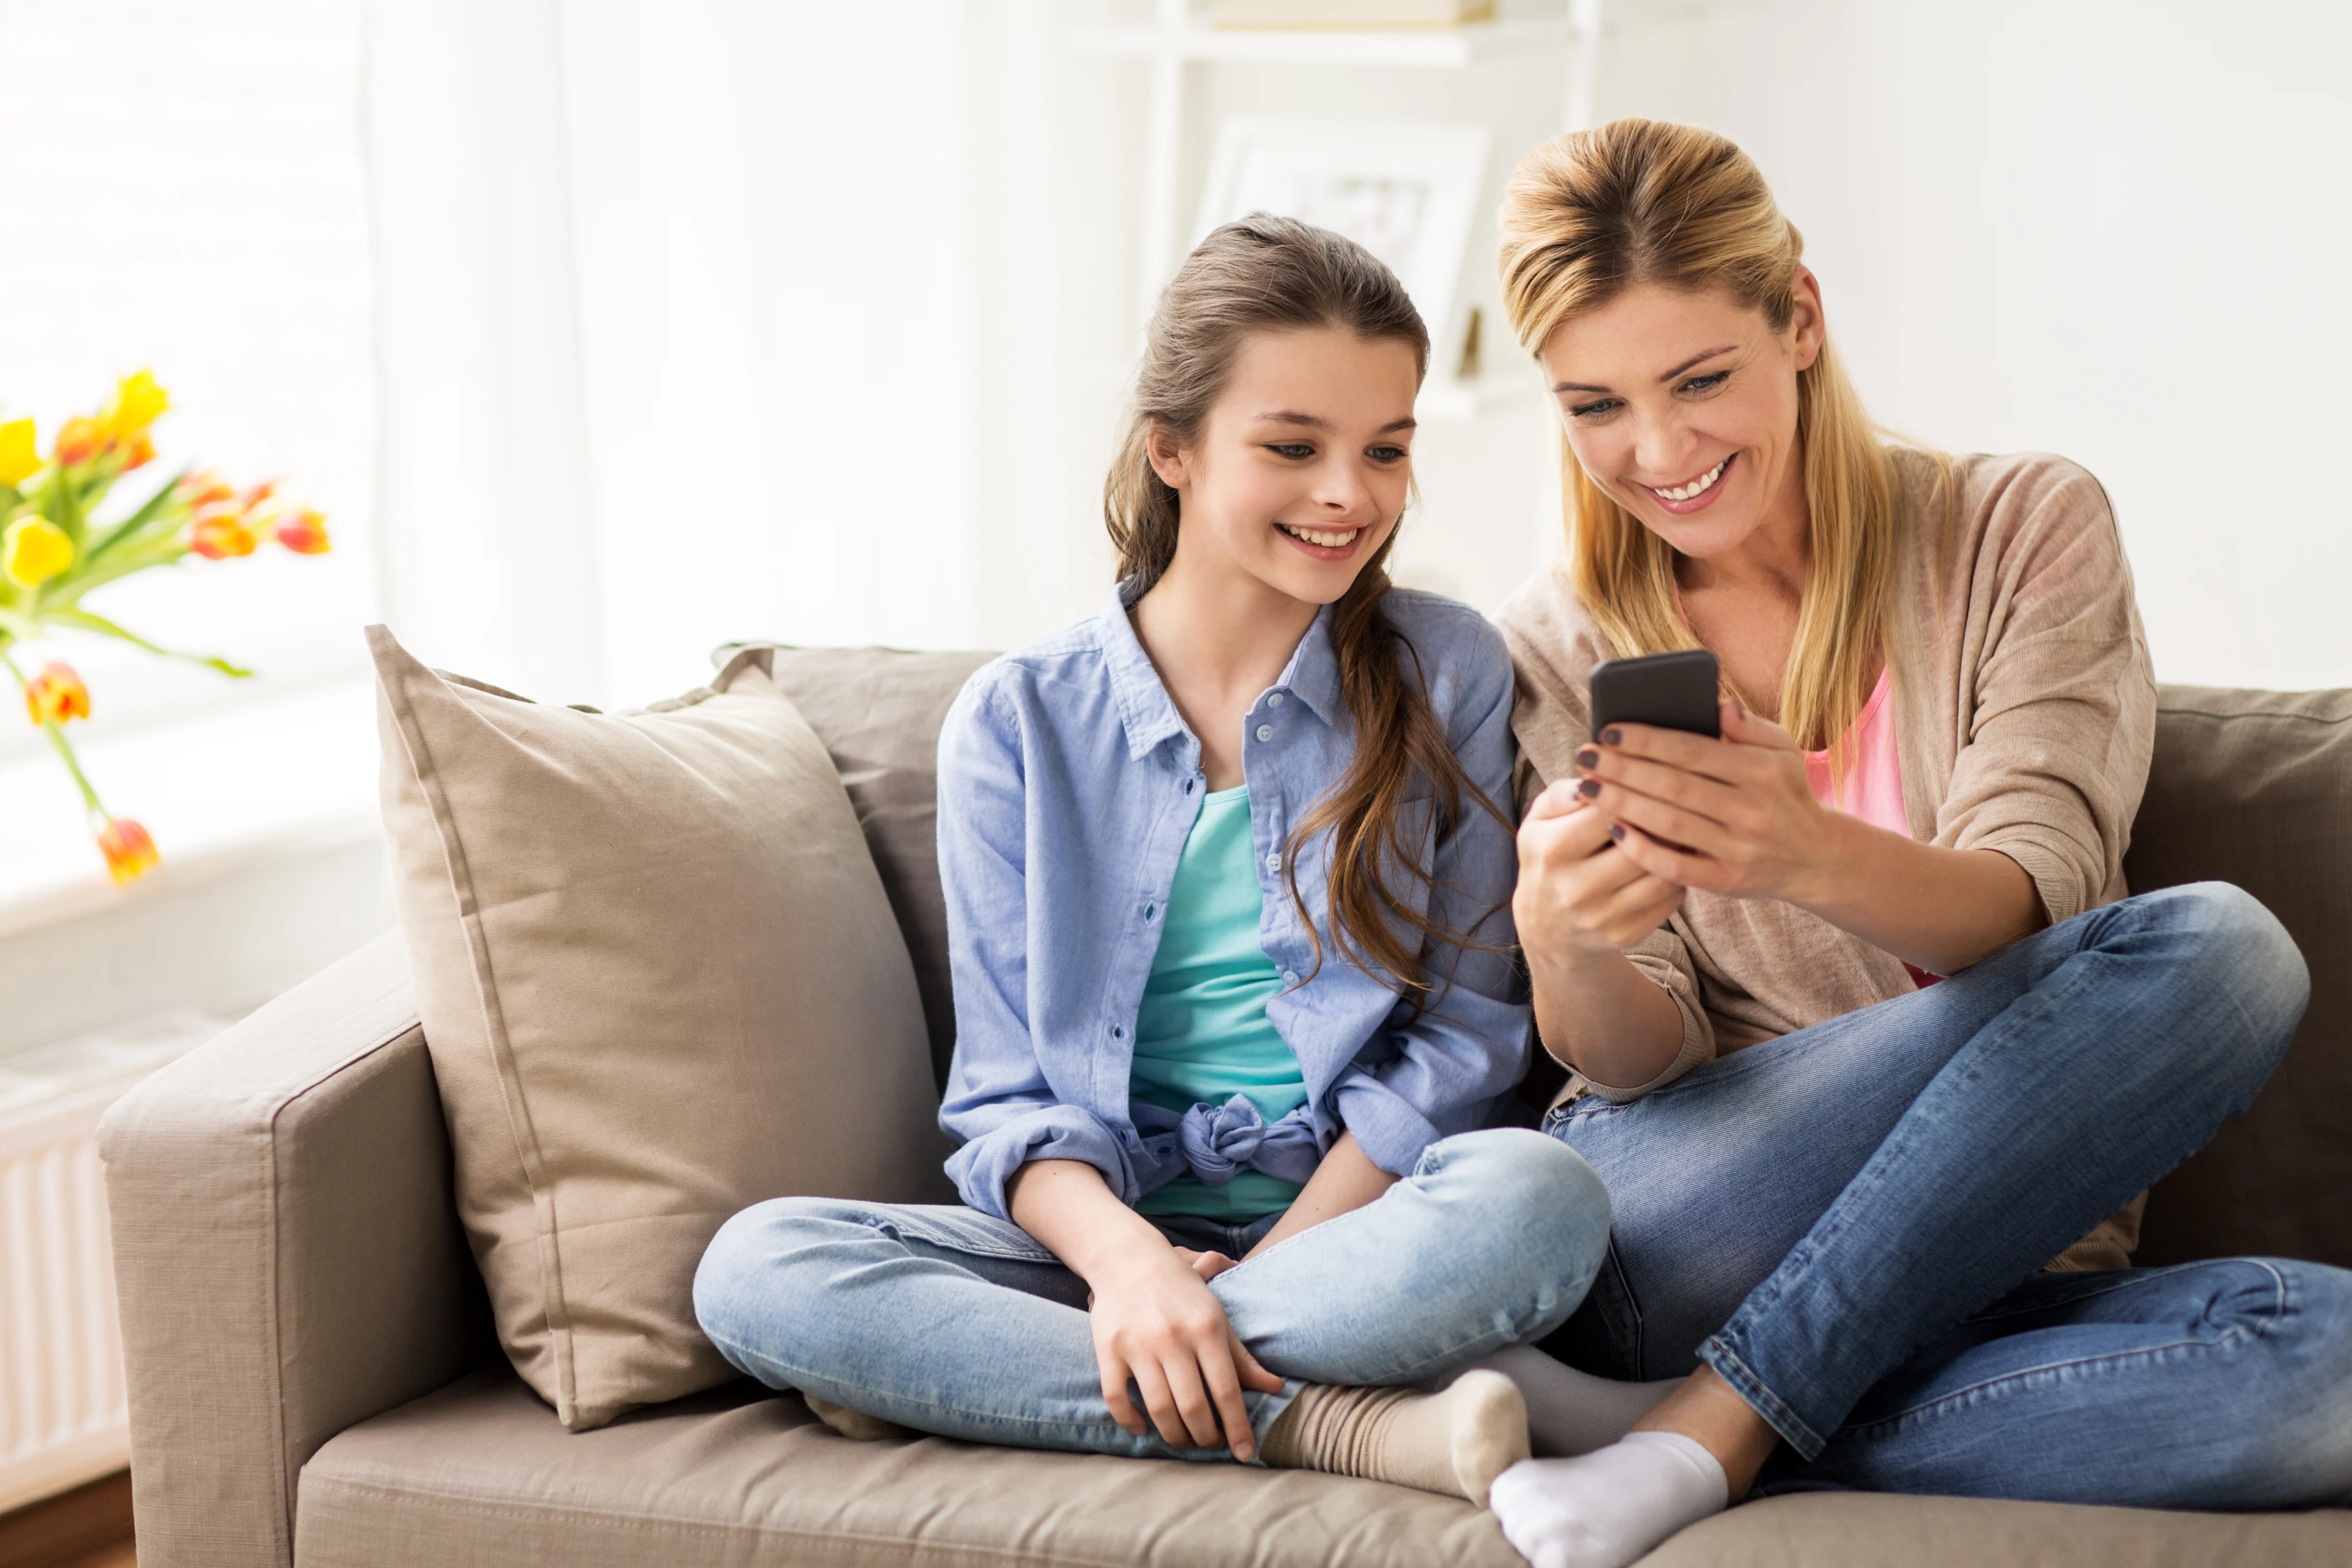 Daughter and mother sitting on a couch while looking at a phone